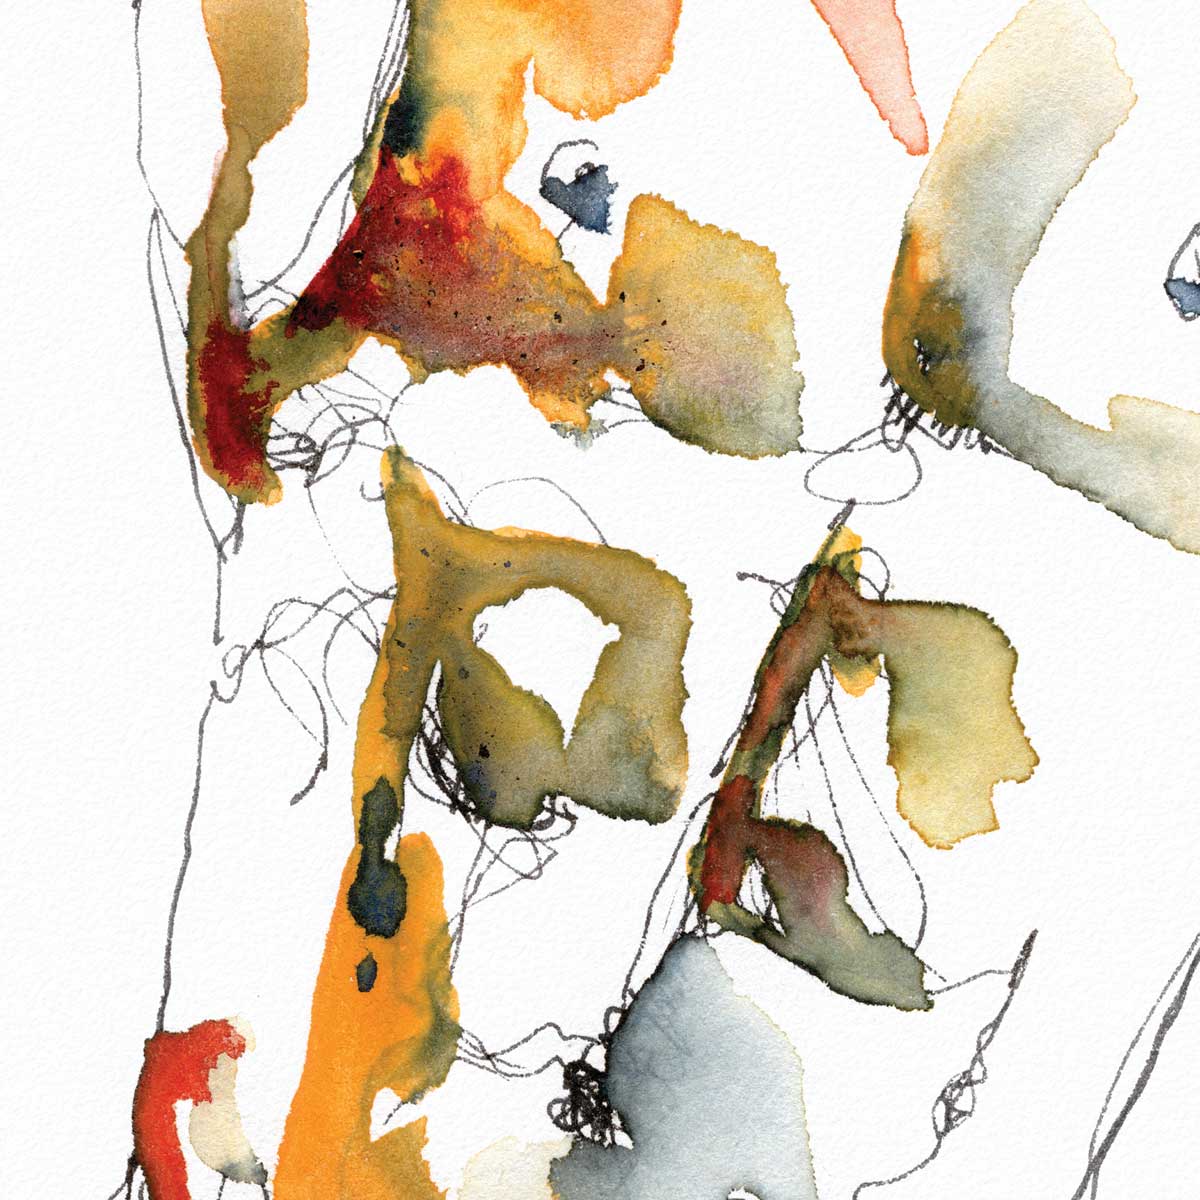 Nothing For the Imagination - Ink and Watercolor - Giclee Art Print